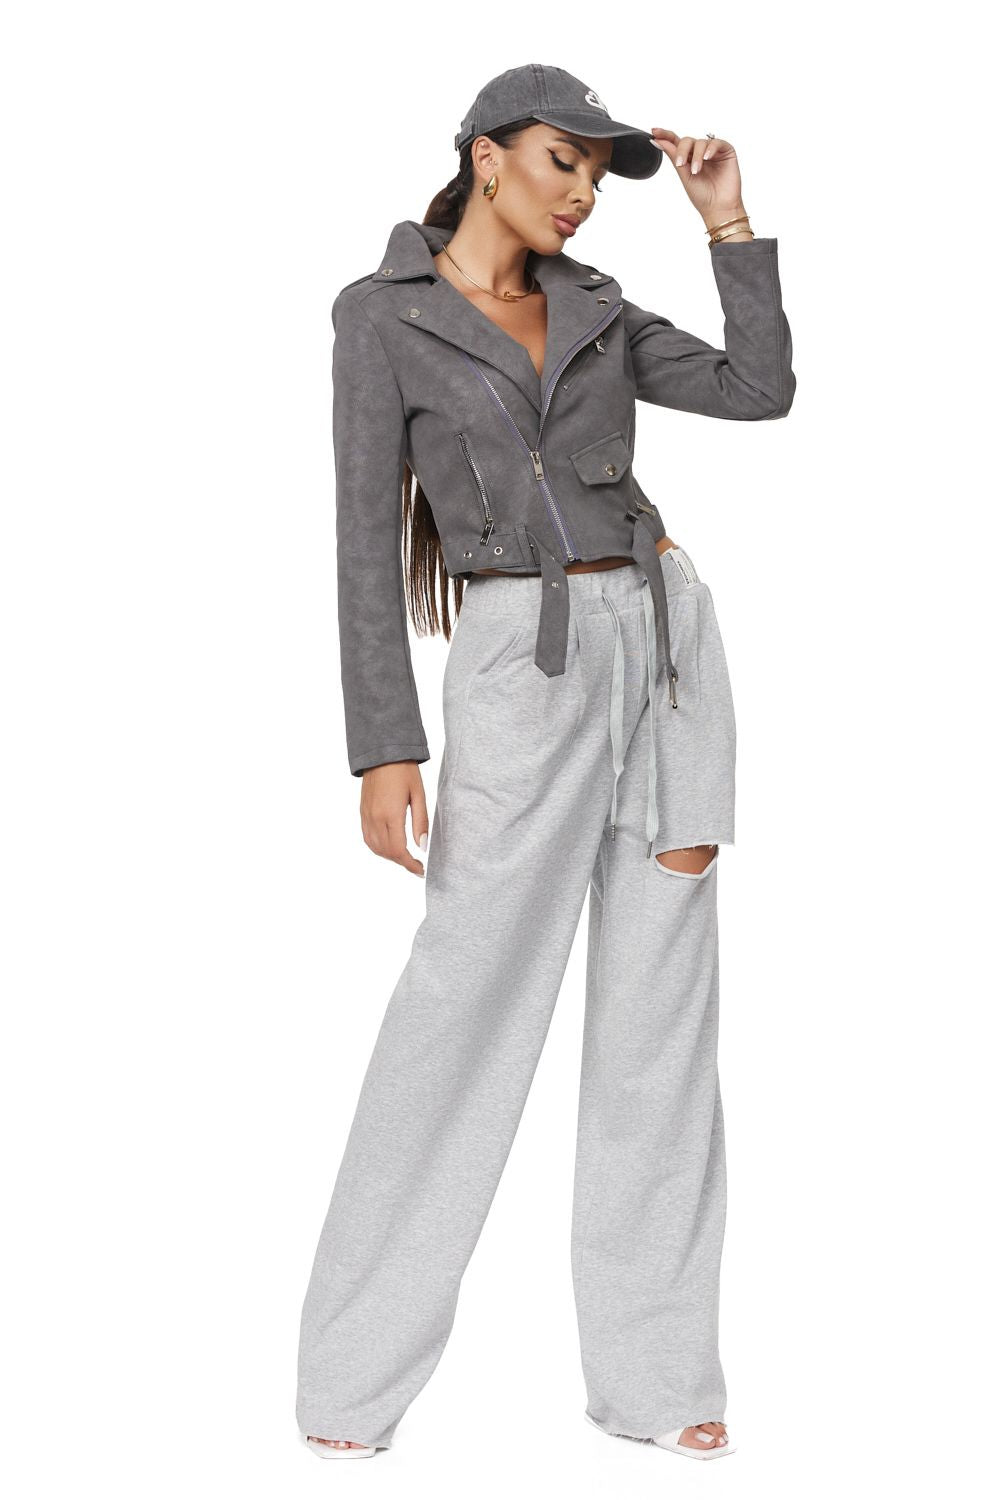 Cotesia Bogas grey casual ladies trousers